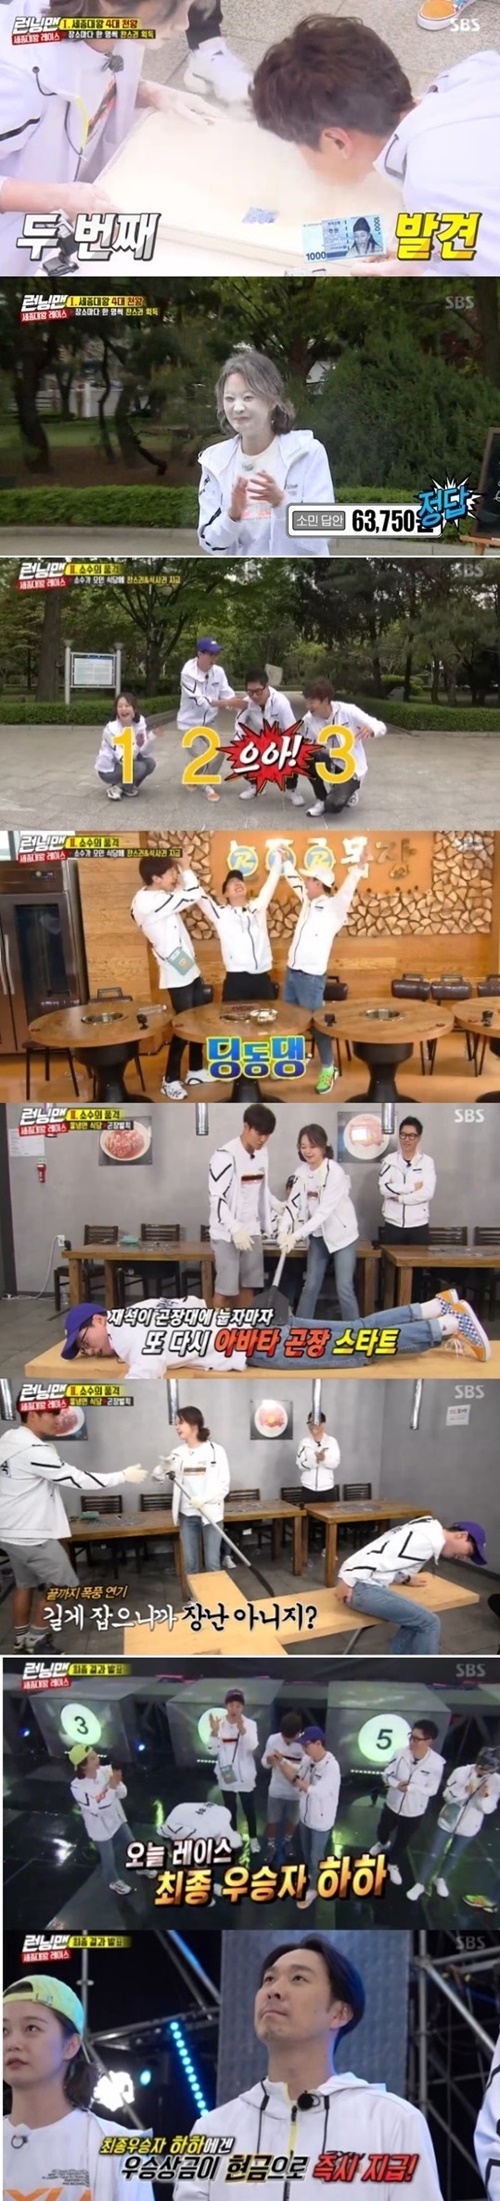 The scene where Running Man broadcaster Haha wins the final was the best one minute.According to Nielsen Korea, a ratings agency on the 13th, Running Man, which was broadcast on the 12th, ranked first in the same time zone with a 3.5 percent increase in target audience rating of 2049, an important indicator of major advertising officials, by 0.8 percent from last week.The average audience rating also rose vertically, recording 4.5% in the first part and 6.9% in the second part (based on the audience rating of households in the Seoul Seoul Capital Area), and the highest audience rating per minute rose to 7.8%.The broadcast was decorated with a pleasant Sejong the Greats Mysterious Race, and the fierce mission confrontation of the members toward the championship was held, and the defeat team was laughed with a fine penalty.The final mission was the complete reconquest quiz of King Sejong. The members solved various quizzes related to King Sejong in the super-sized penalty set.Yoo Jae-seok struggled, but the final two were Haha and Jeon So-min.In particular, Haha did not meet any problems until the final stage, but won the lucky championship by facing only one problem in the confrontation with Jeon So-min.The scene recorded the highest audience rating of 7.8% per minute, accounting for the best one minute.On the other hand, Running Man will start Running Man 9th Anniversary Special Project - Running Man Fan Meeting: Running Zone Project from the 18th.